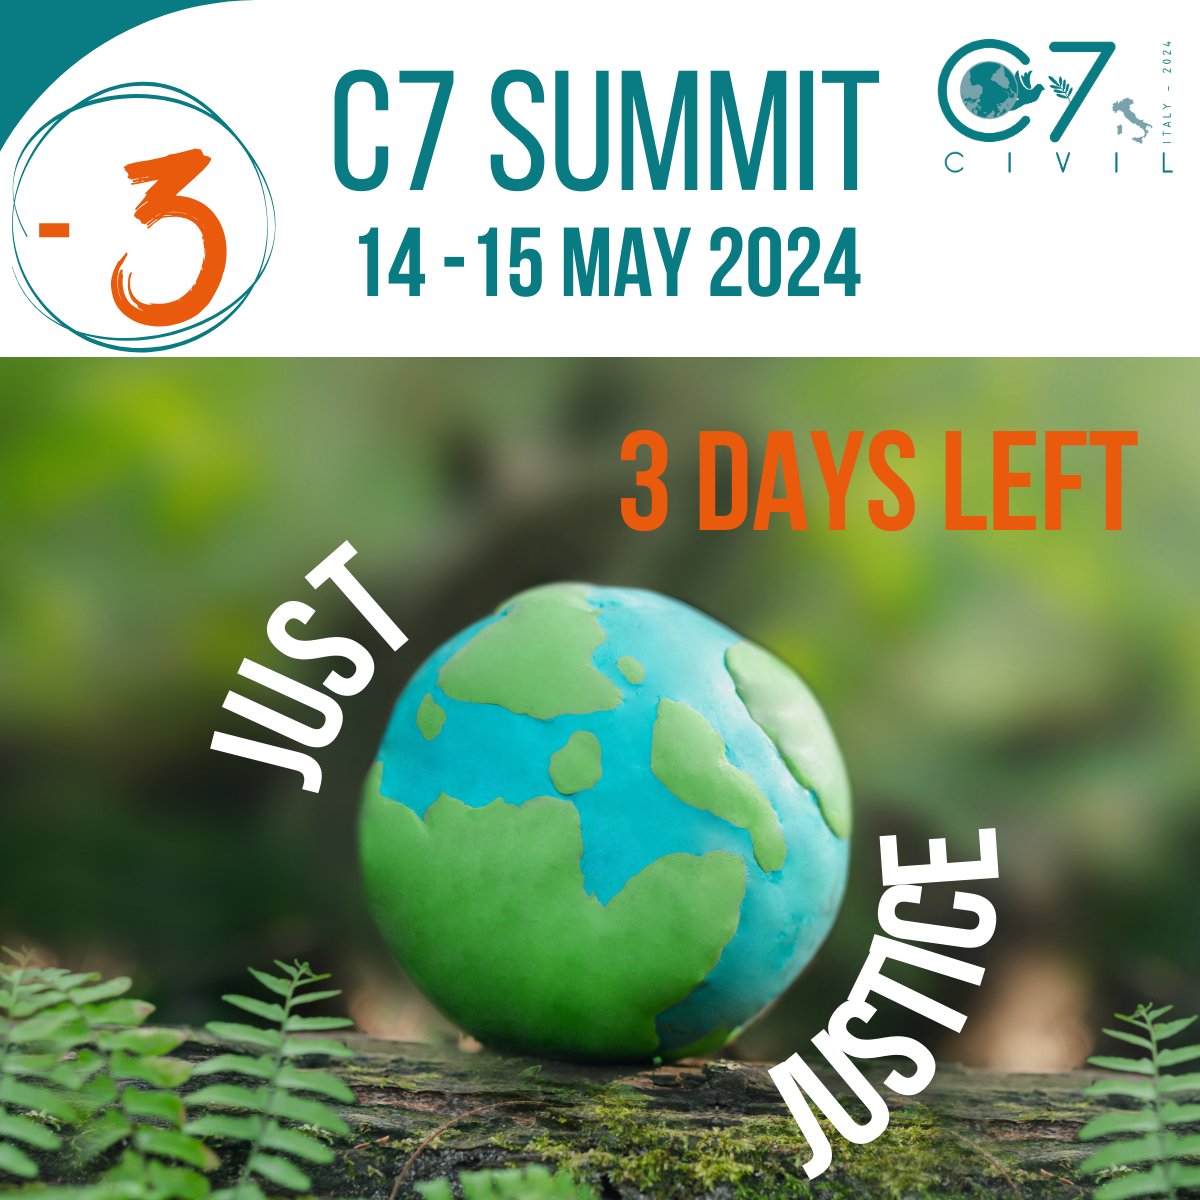 ⭕️ 𝗖𝟳 𝗦𝗨𝗠𝗠𝗜𝗧 ⭕️ #JustJustice. The C7 Summit is only a few days away. Looking forward to see you very soon 😃. For all information see the C7 website 👇civil7.org #civil72024, #civil7Italy, #civil7ITA, #g7italy, #G7ITA